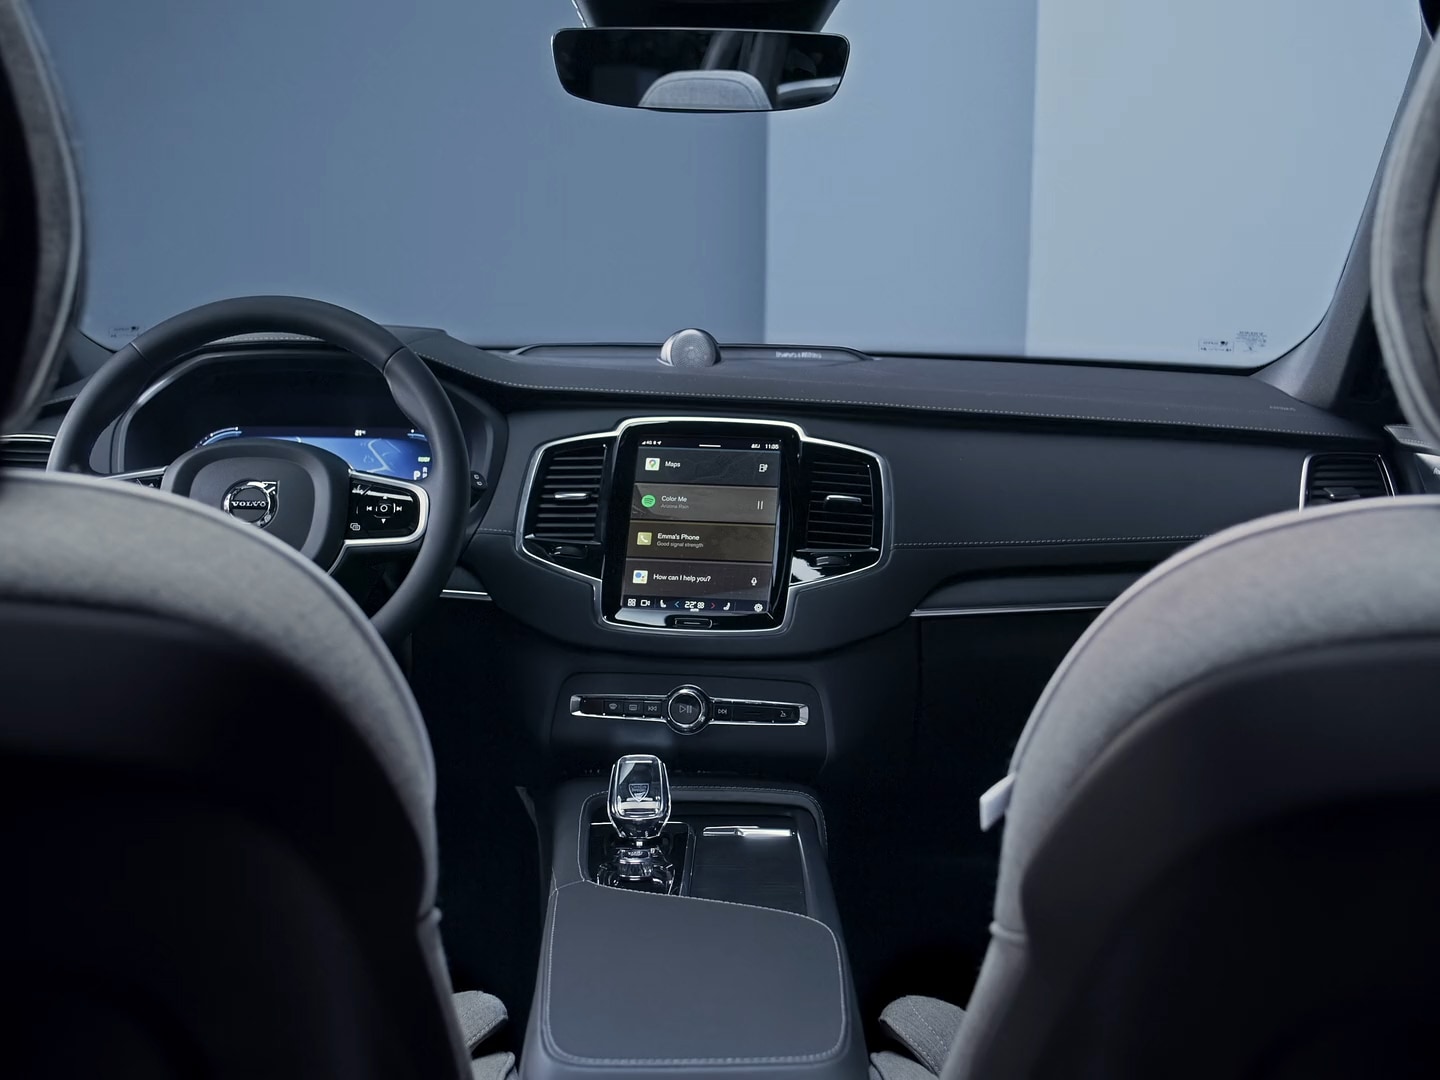 The Volvo XC90 plug-in hybrid’s steering wheel, instrument panel, infotainment touchscreen and centre console.